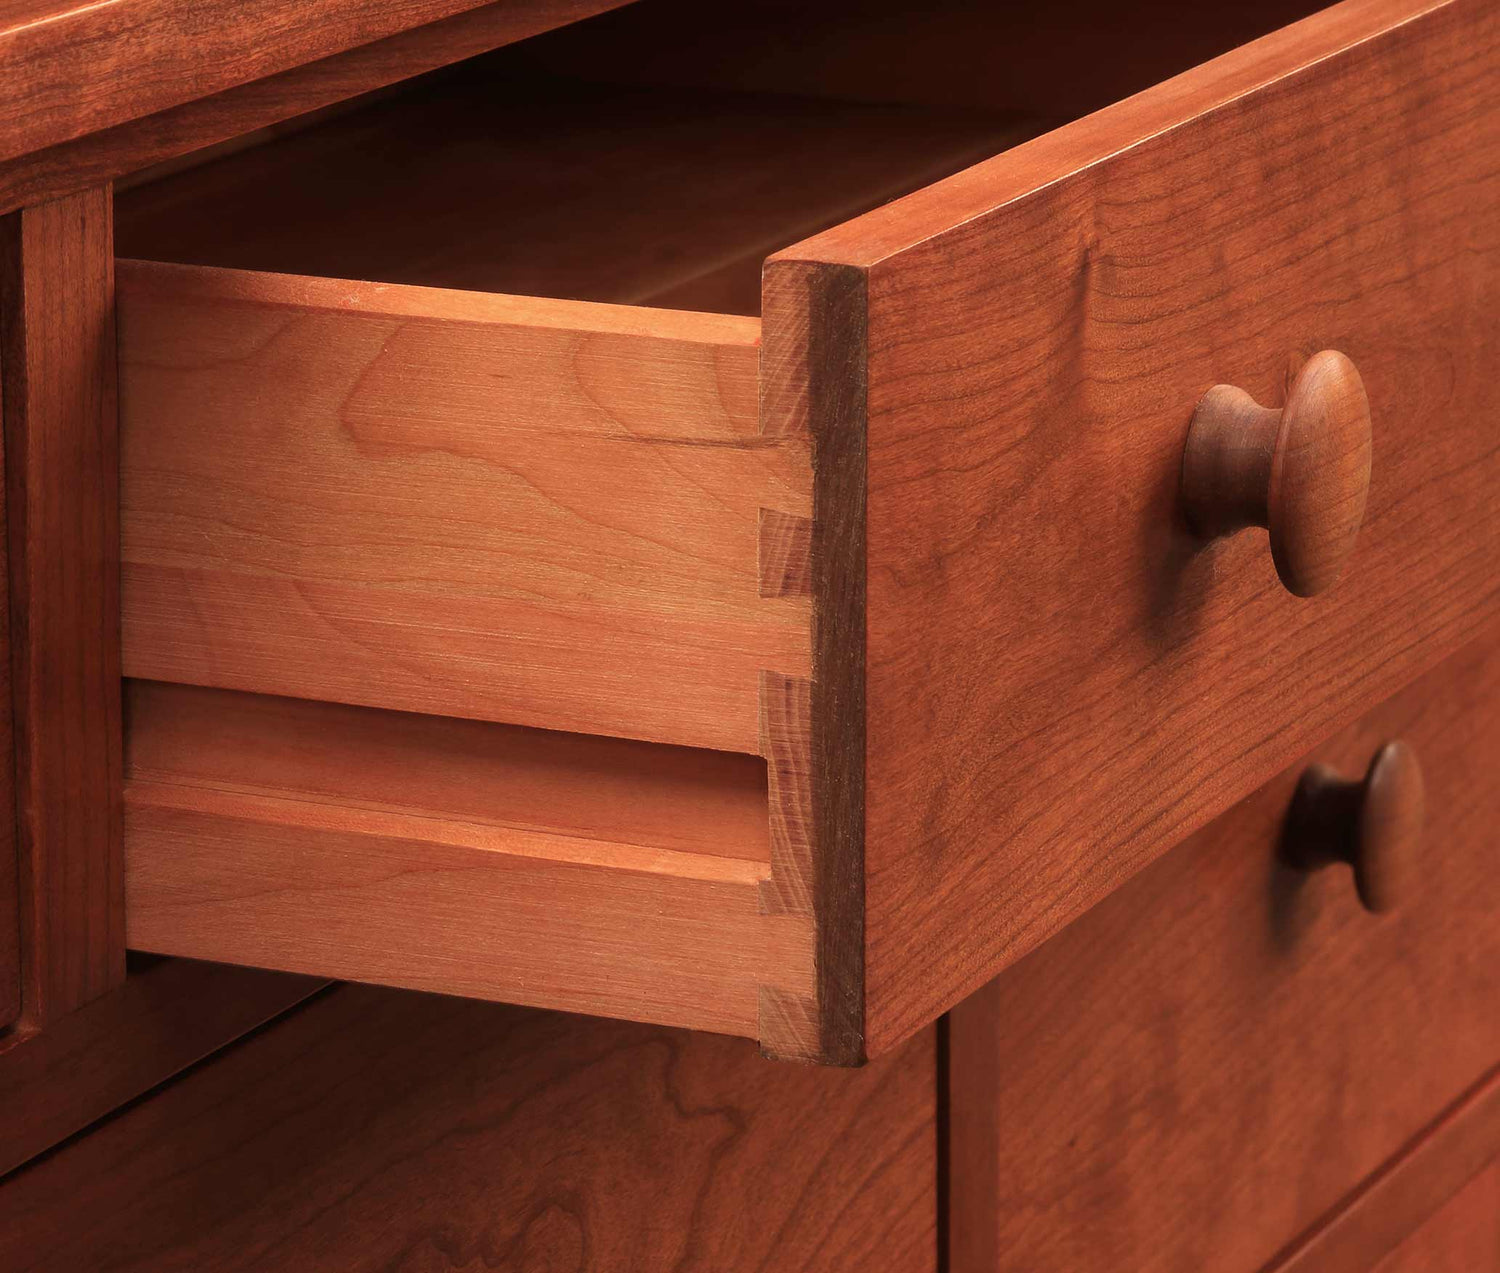 Close up displaying the side-hung and center-guided drawers that are used in all Mission furniture